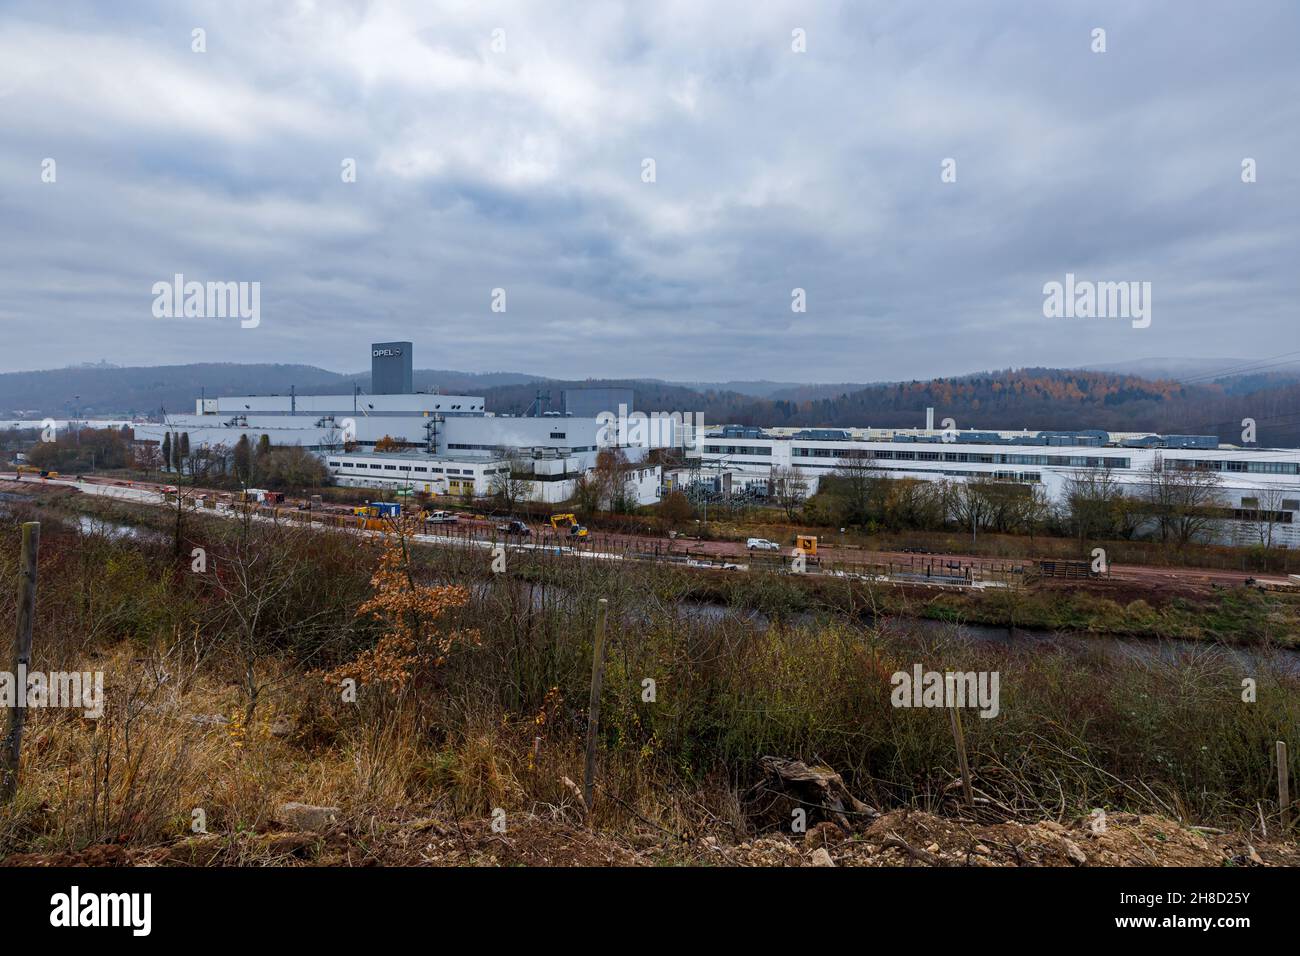 The Opel car factory in Eisenach Thuringia Stock Photo